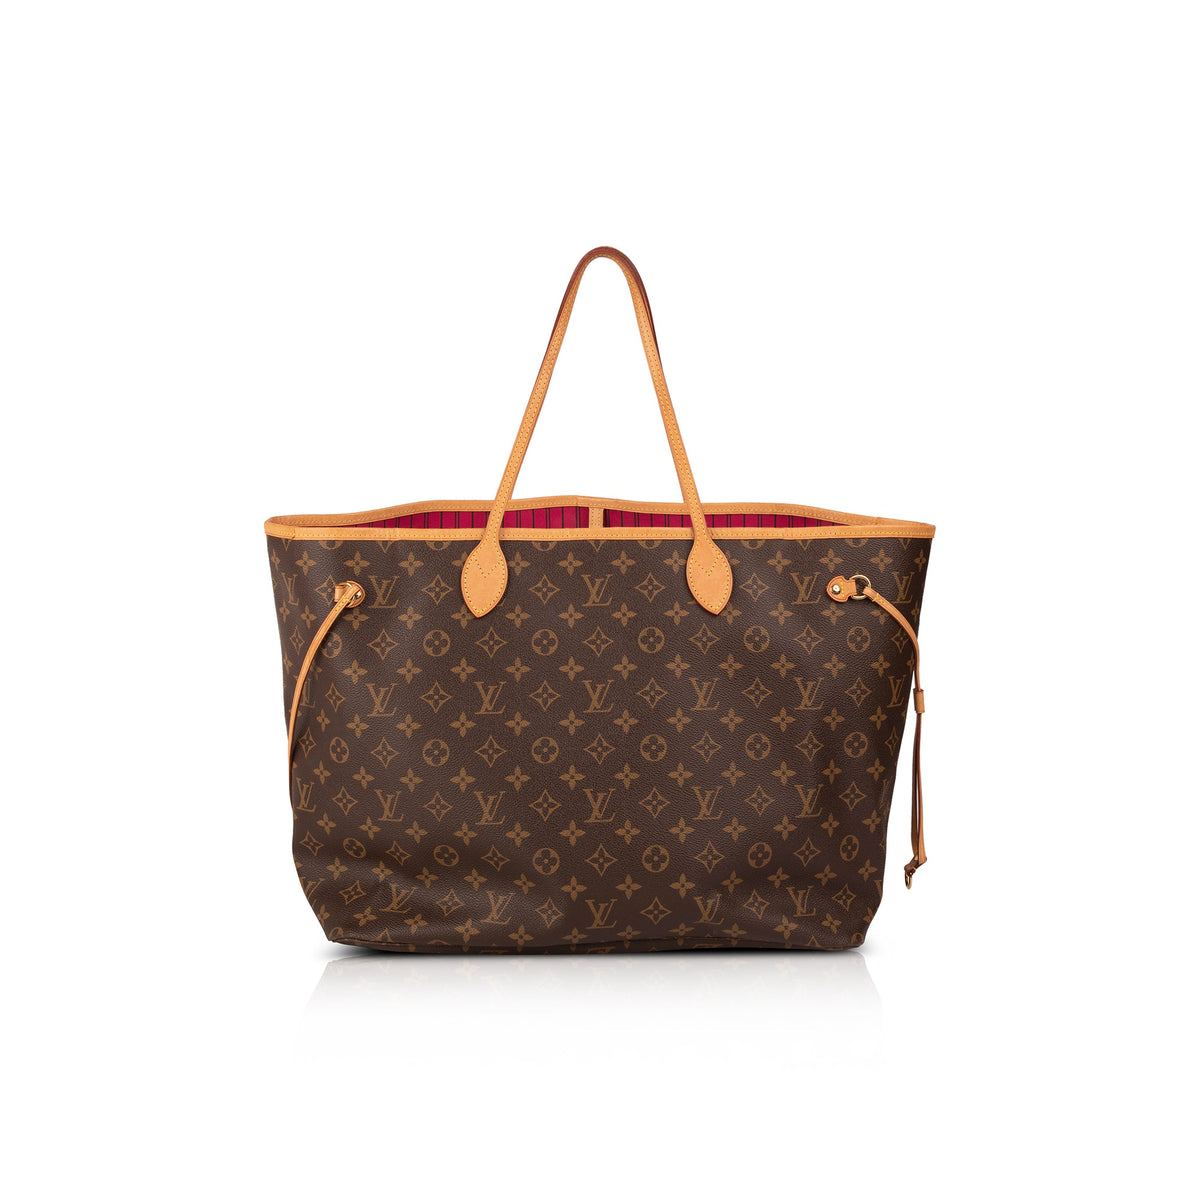 Louise vuitton neverfull MM. , Receipt comes with it